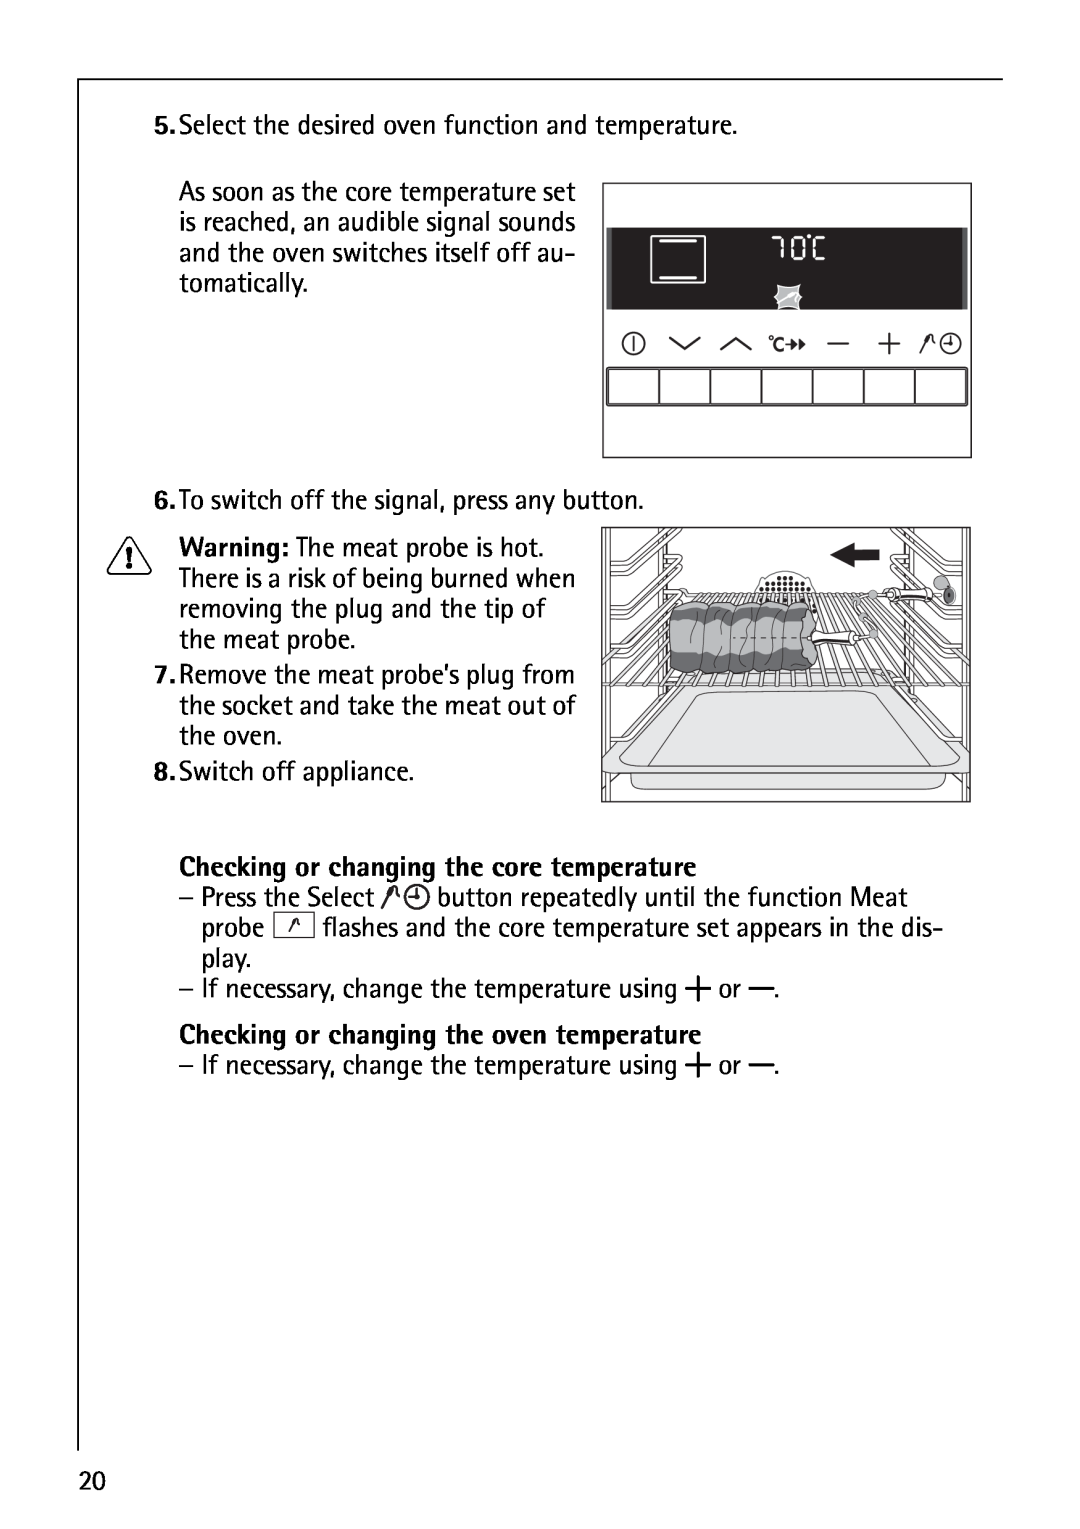 Electrolux B8871-4 manual Checking or changing the core temperature, Checking or changing the oven temperature 